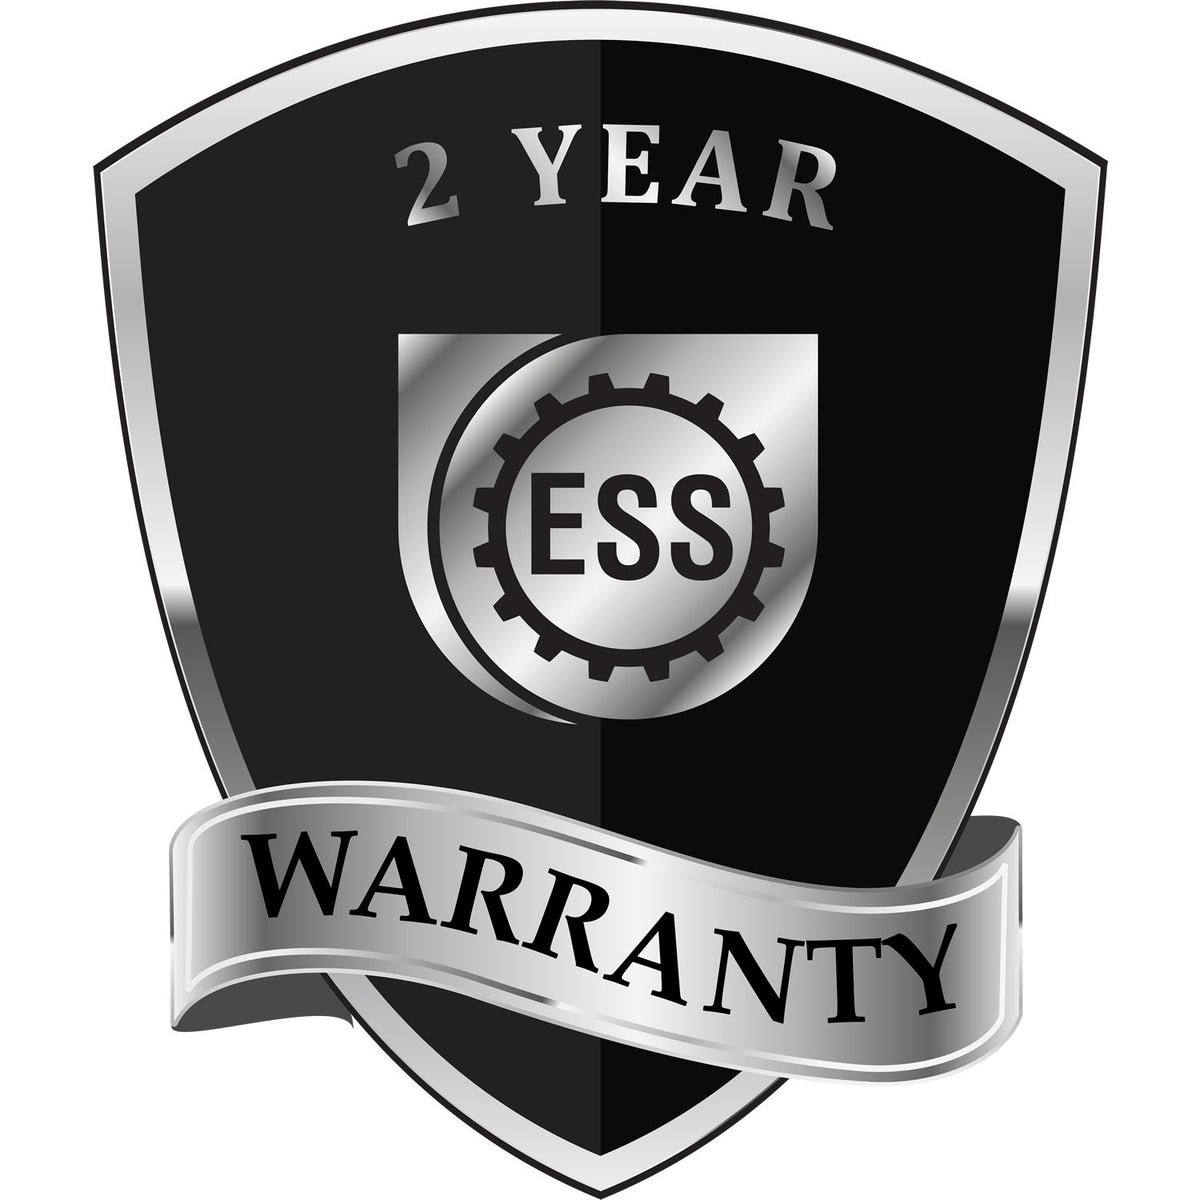 A black and silver badge or emblem showing warranty information for the Maine Geologist Desk Seal